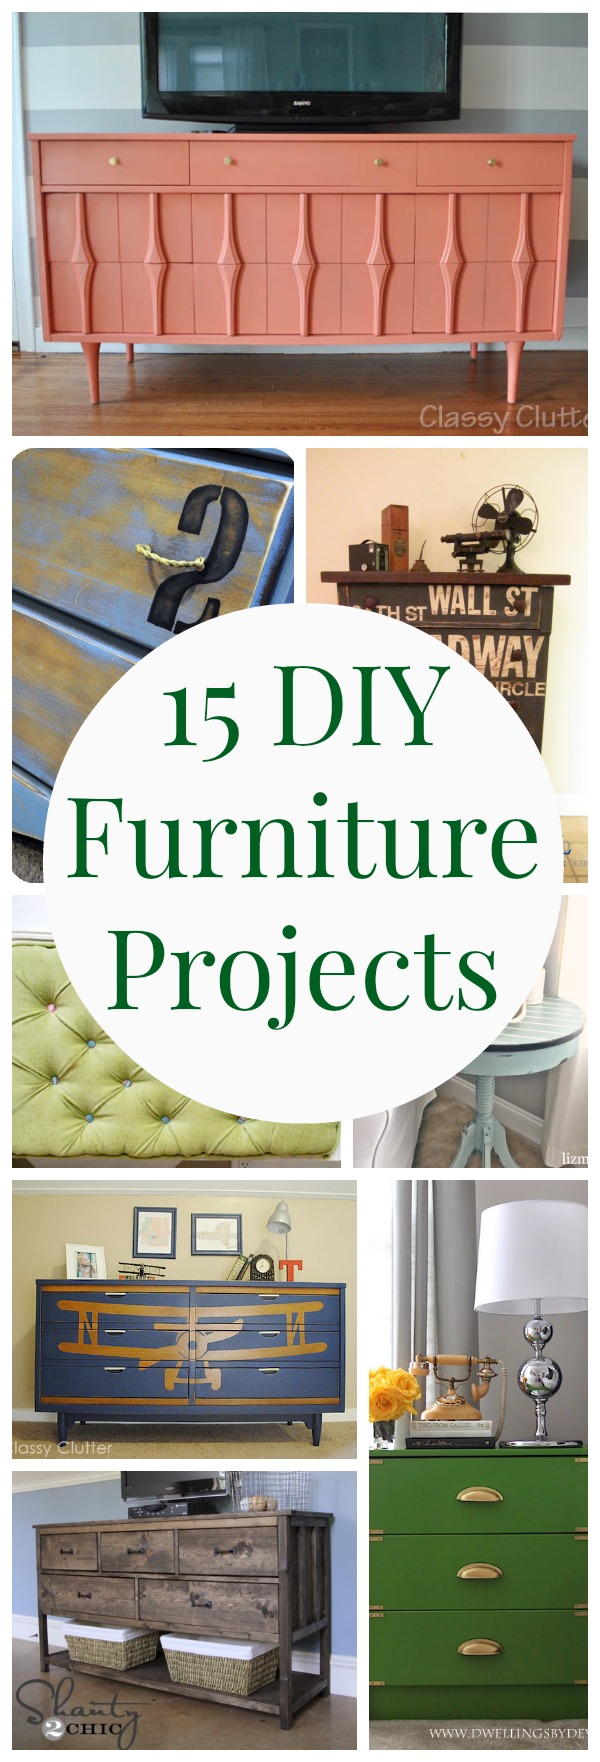 15 DIY Furniture Projects